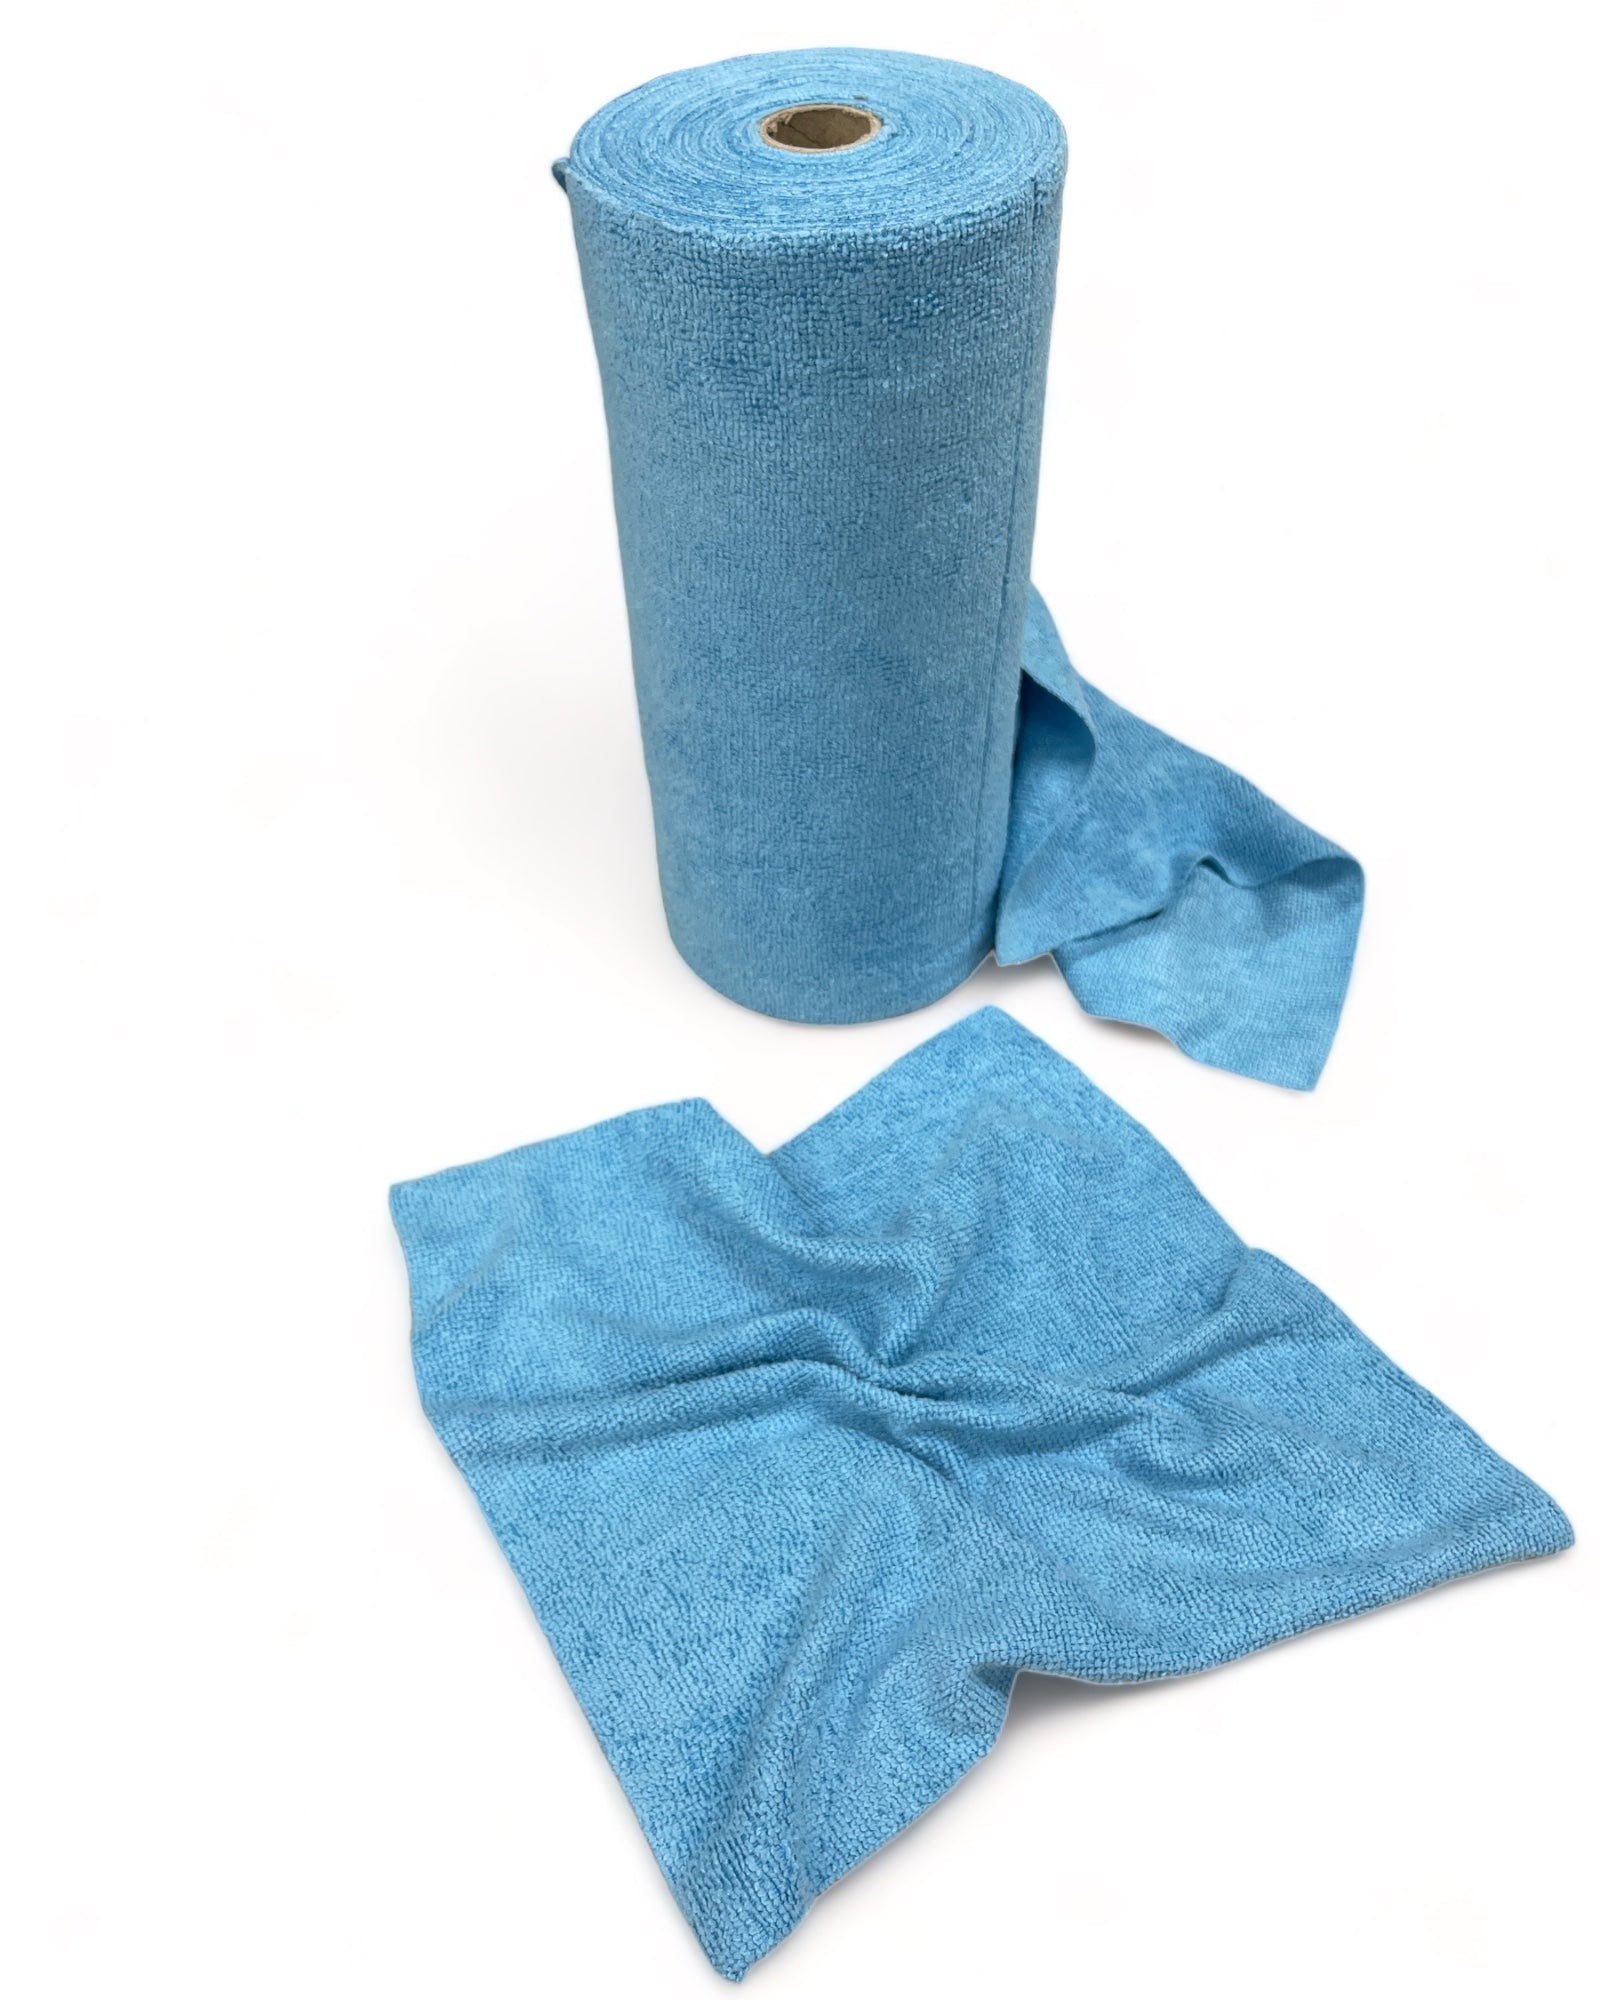 A Roll of Microfiber Towels: Your All-in-One Solution for Cleaning and More